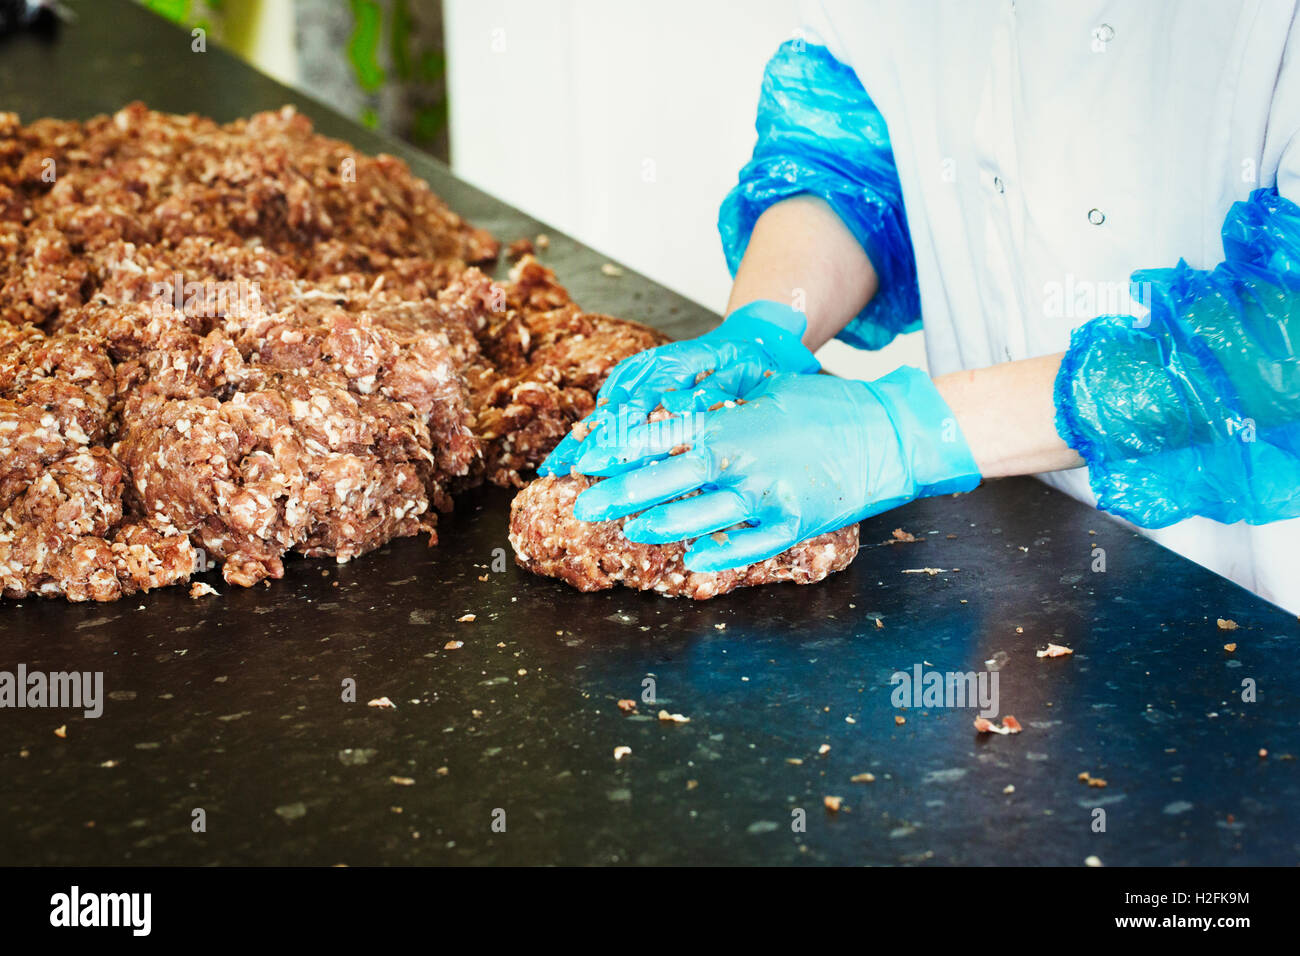 Woman working in a butchery, wearing protective clothes and gloves, shaping minced meat into patties. Stock Photo